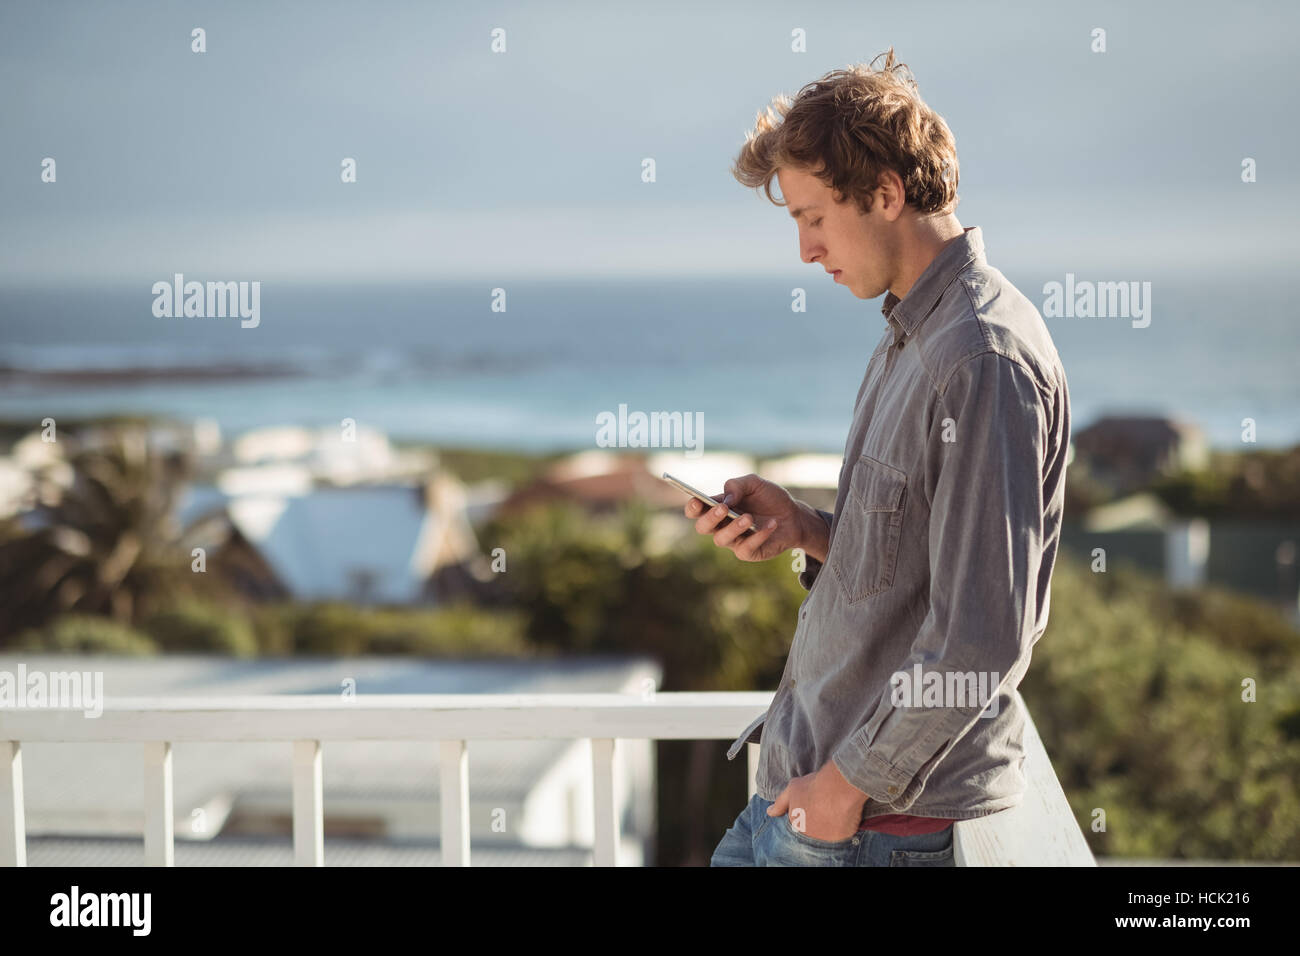 Man standing on balcony and using mobile phone Stock Photo